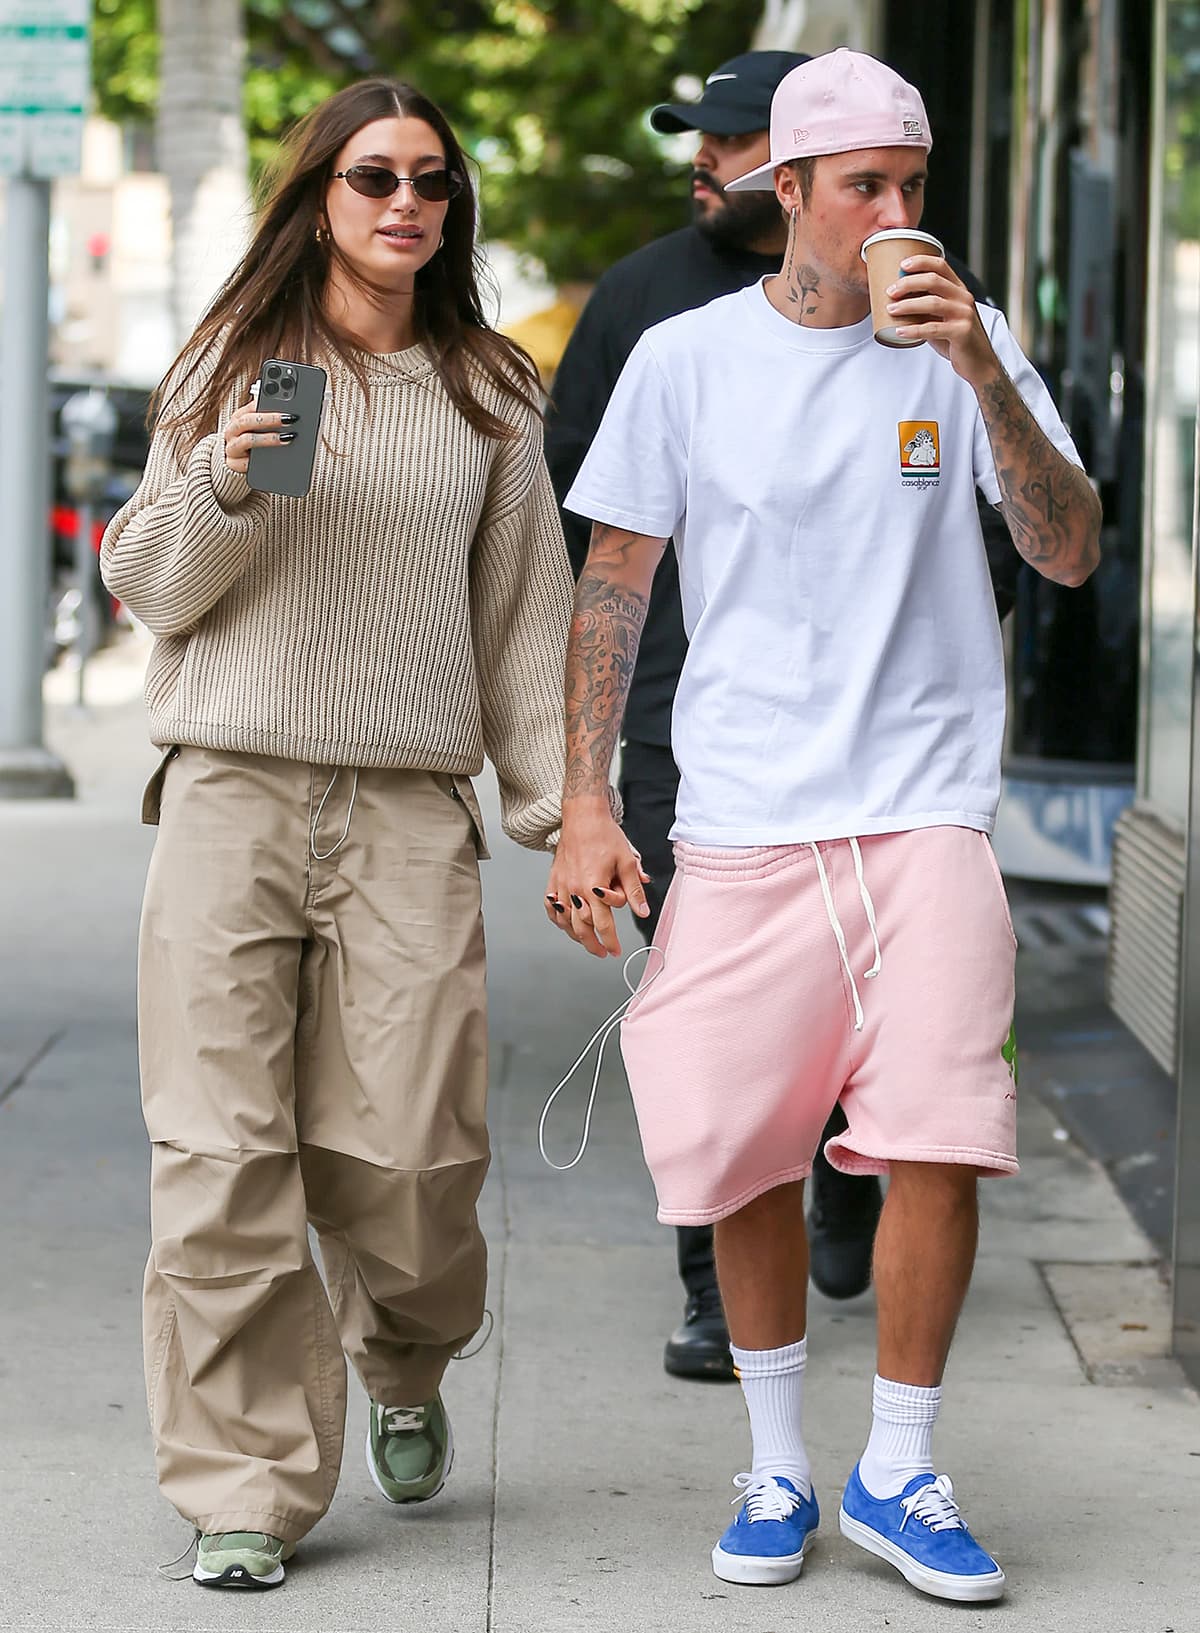 Hailey Bieber insists she did not steal Justin Bieber from Selena Gomez